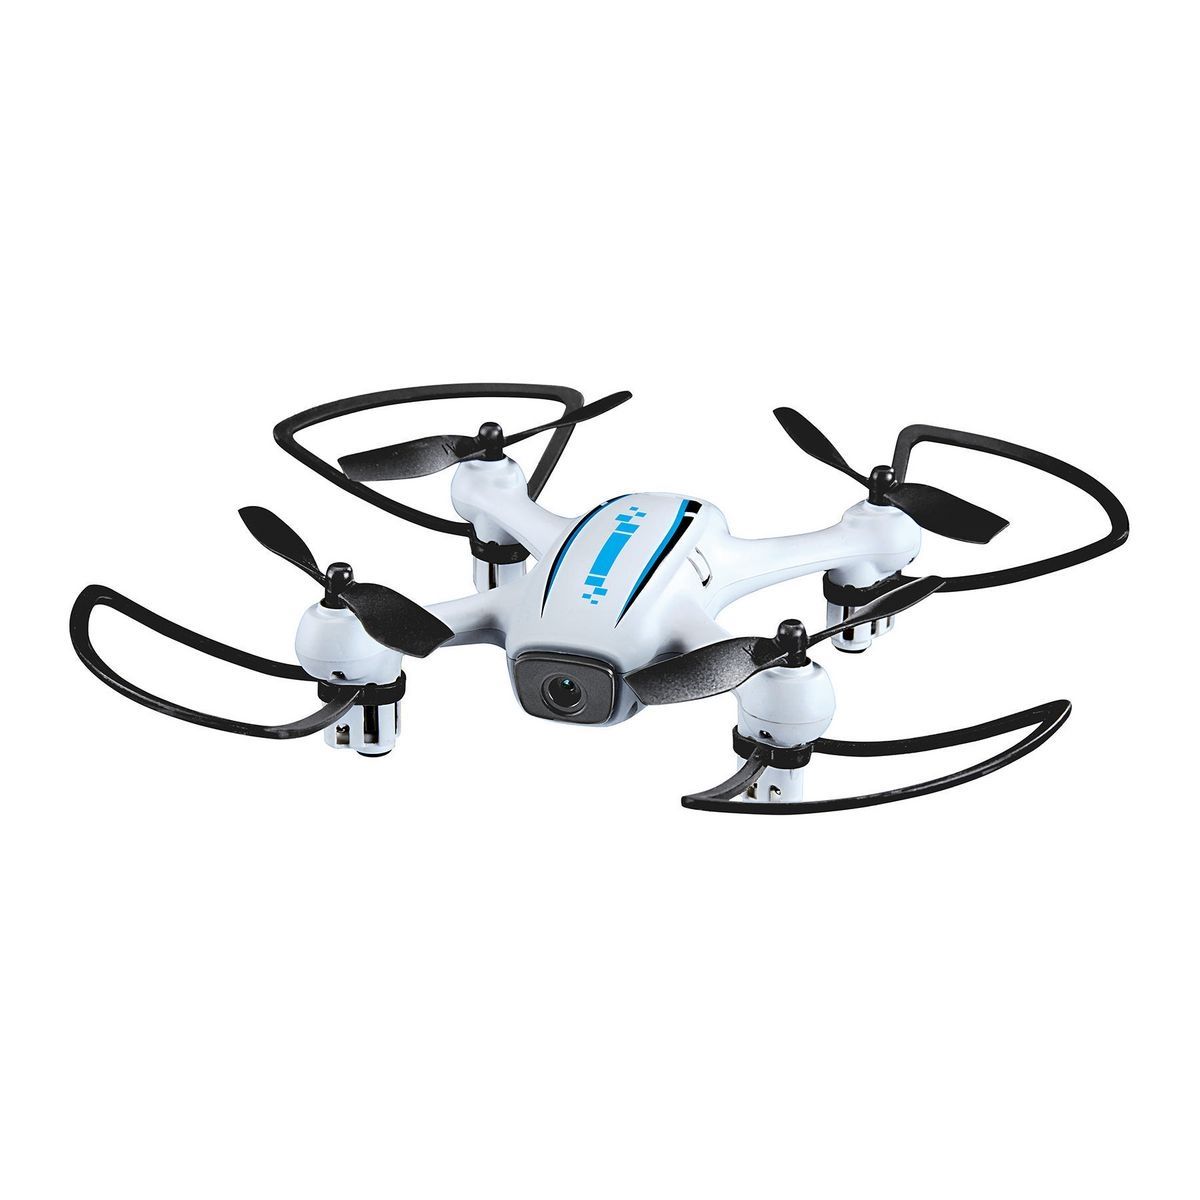 PROTOCOL High Performance Drone with 480p Camera/Video